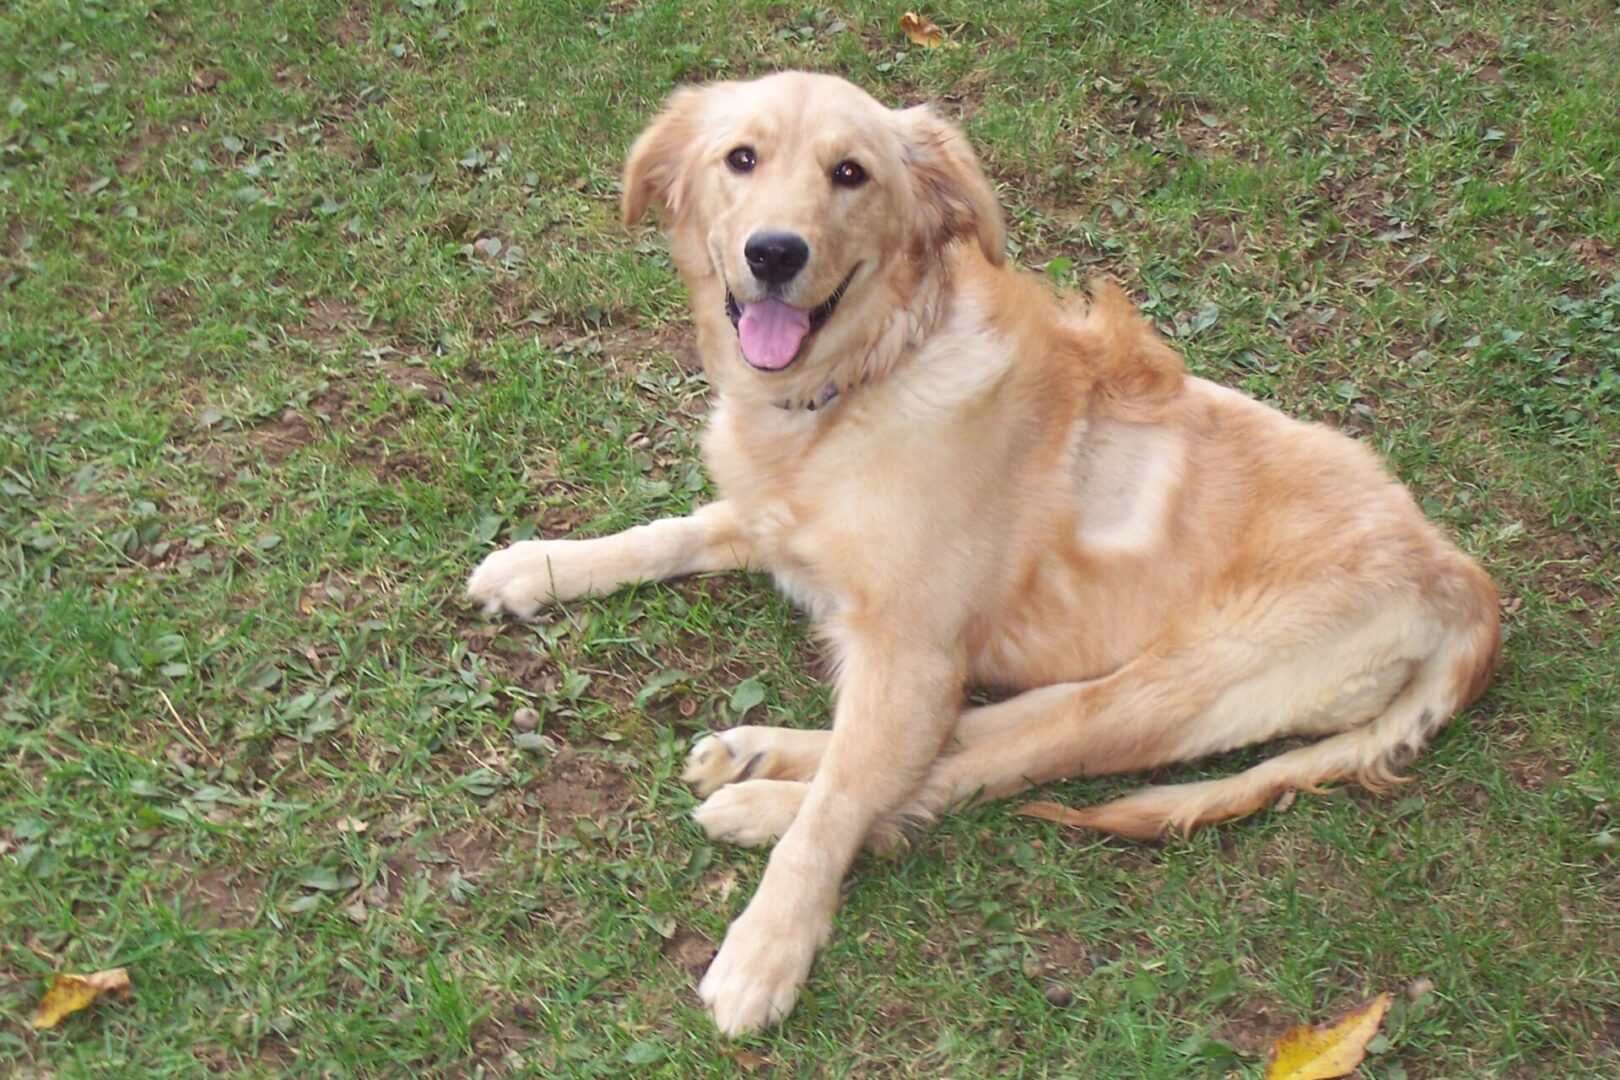 A golden retriever lying on the grass with its tongue out.